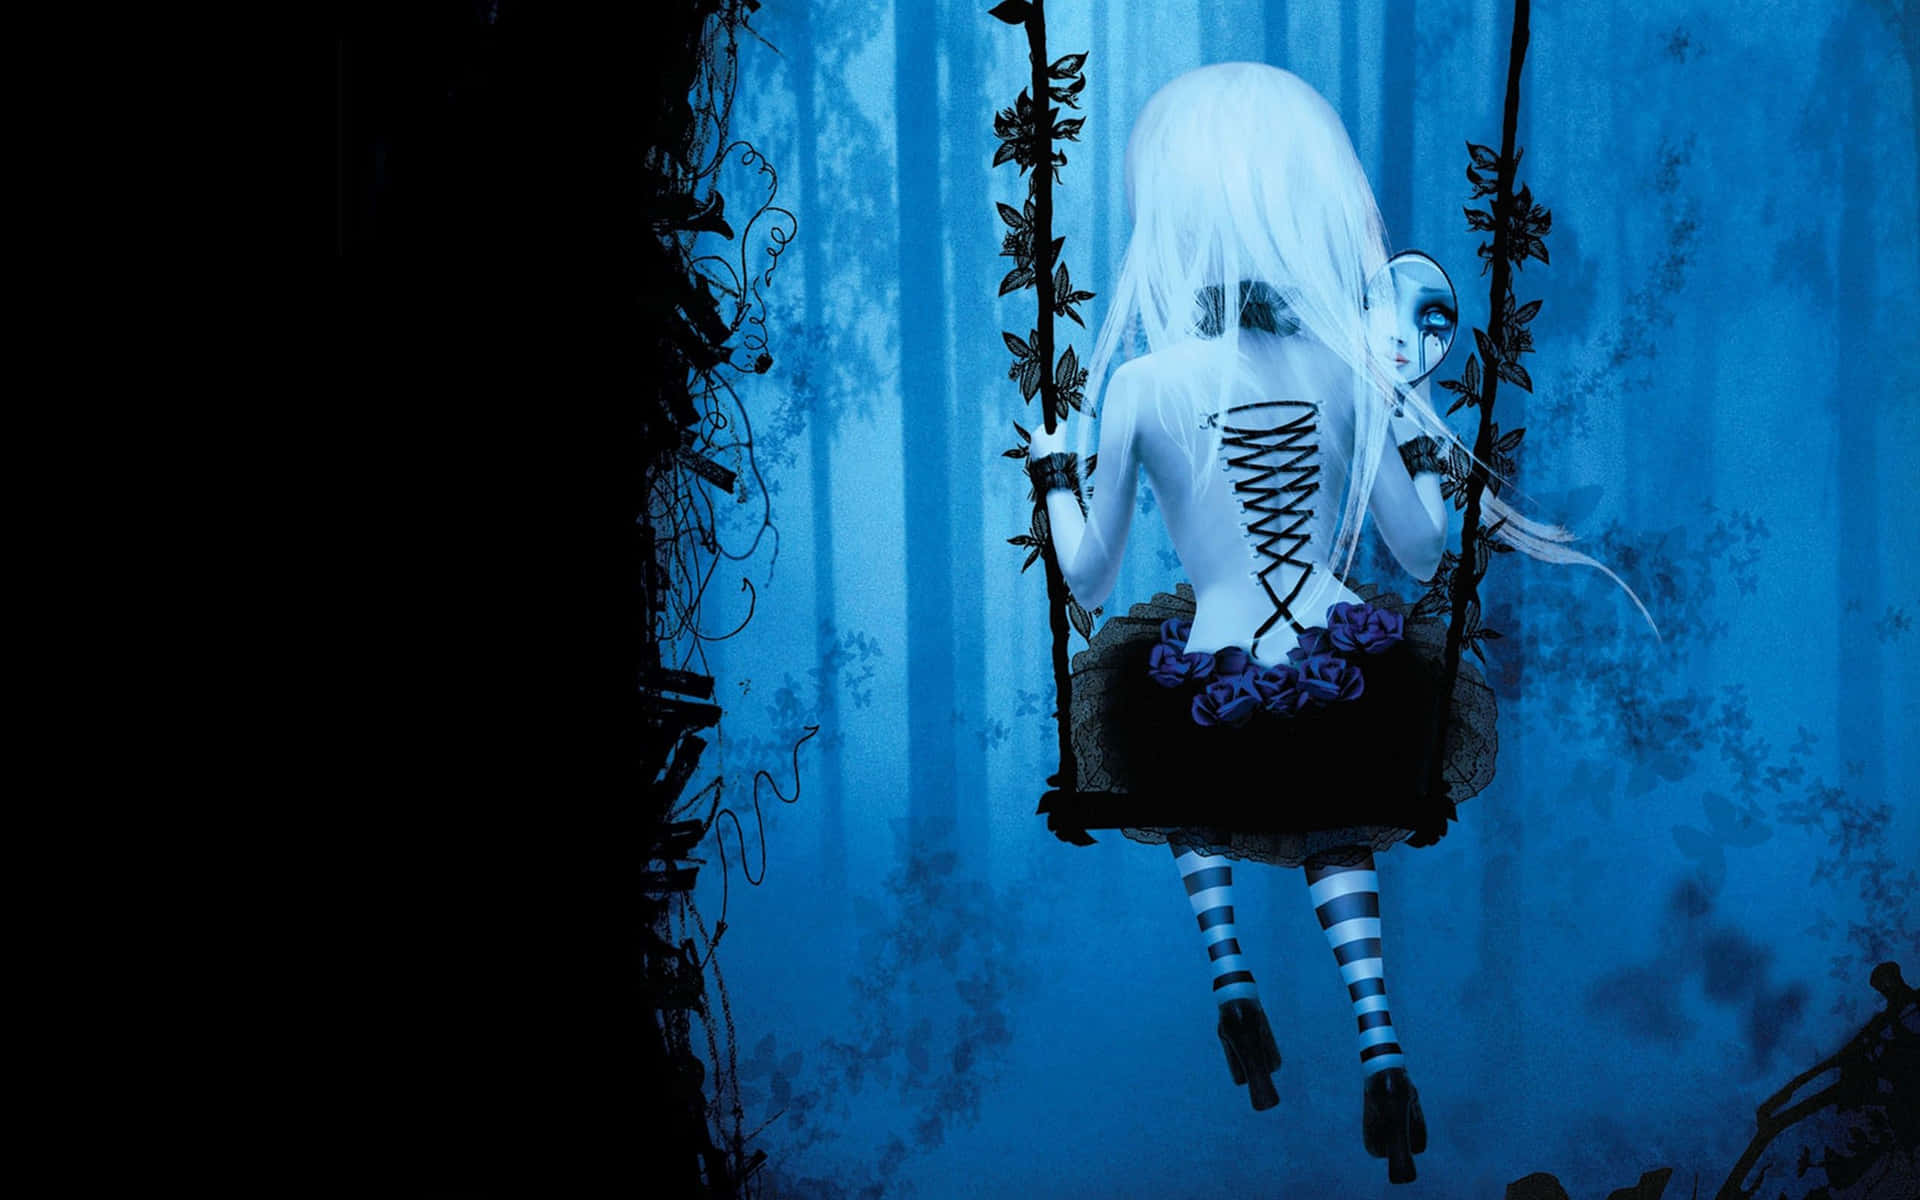 Step into the dark with horror anime Wallpaper